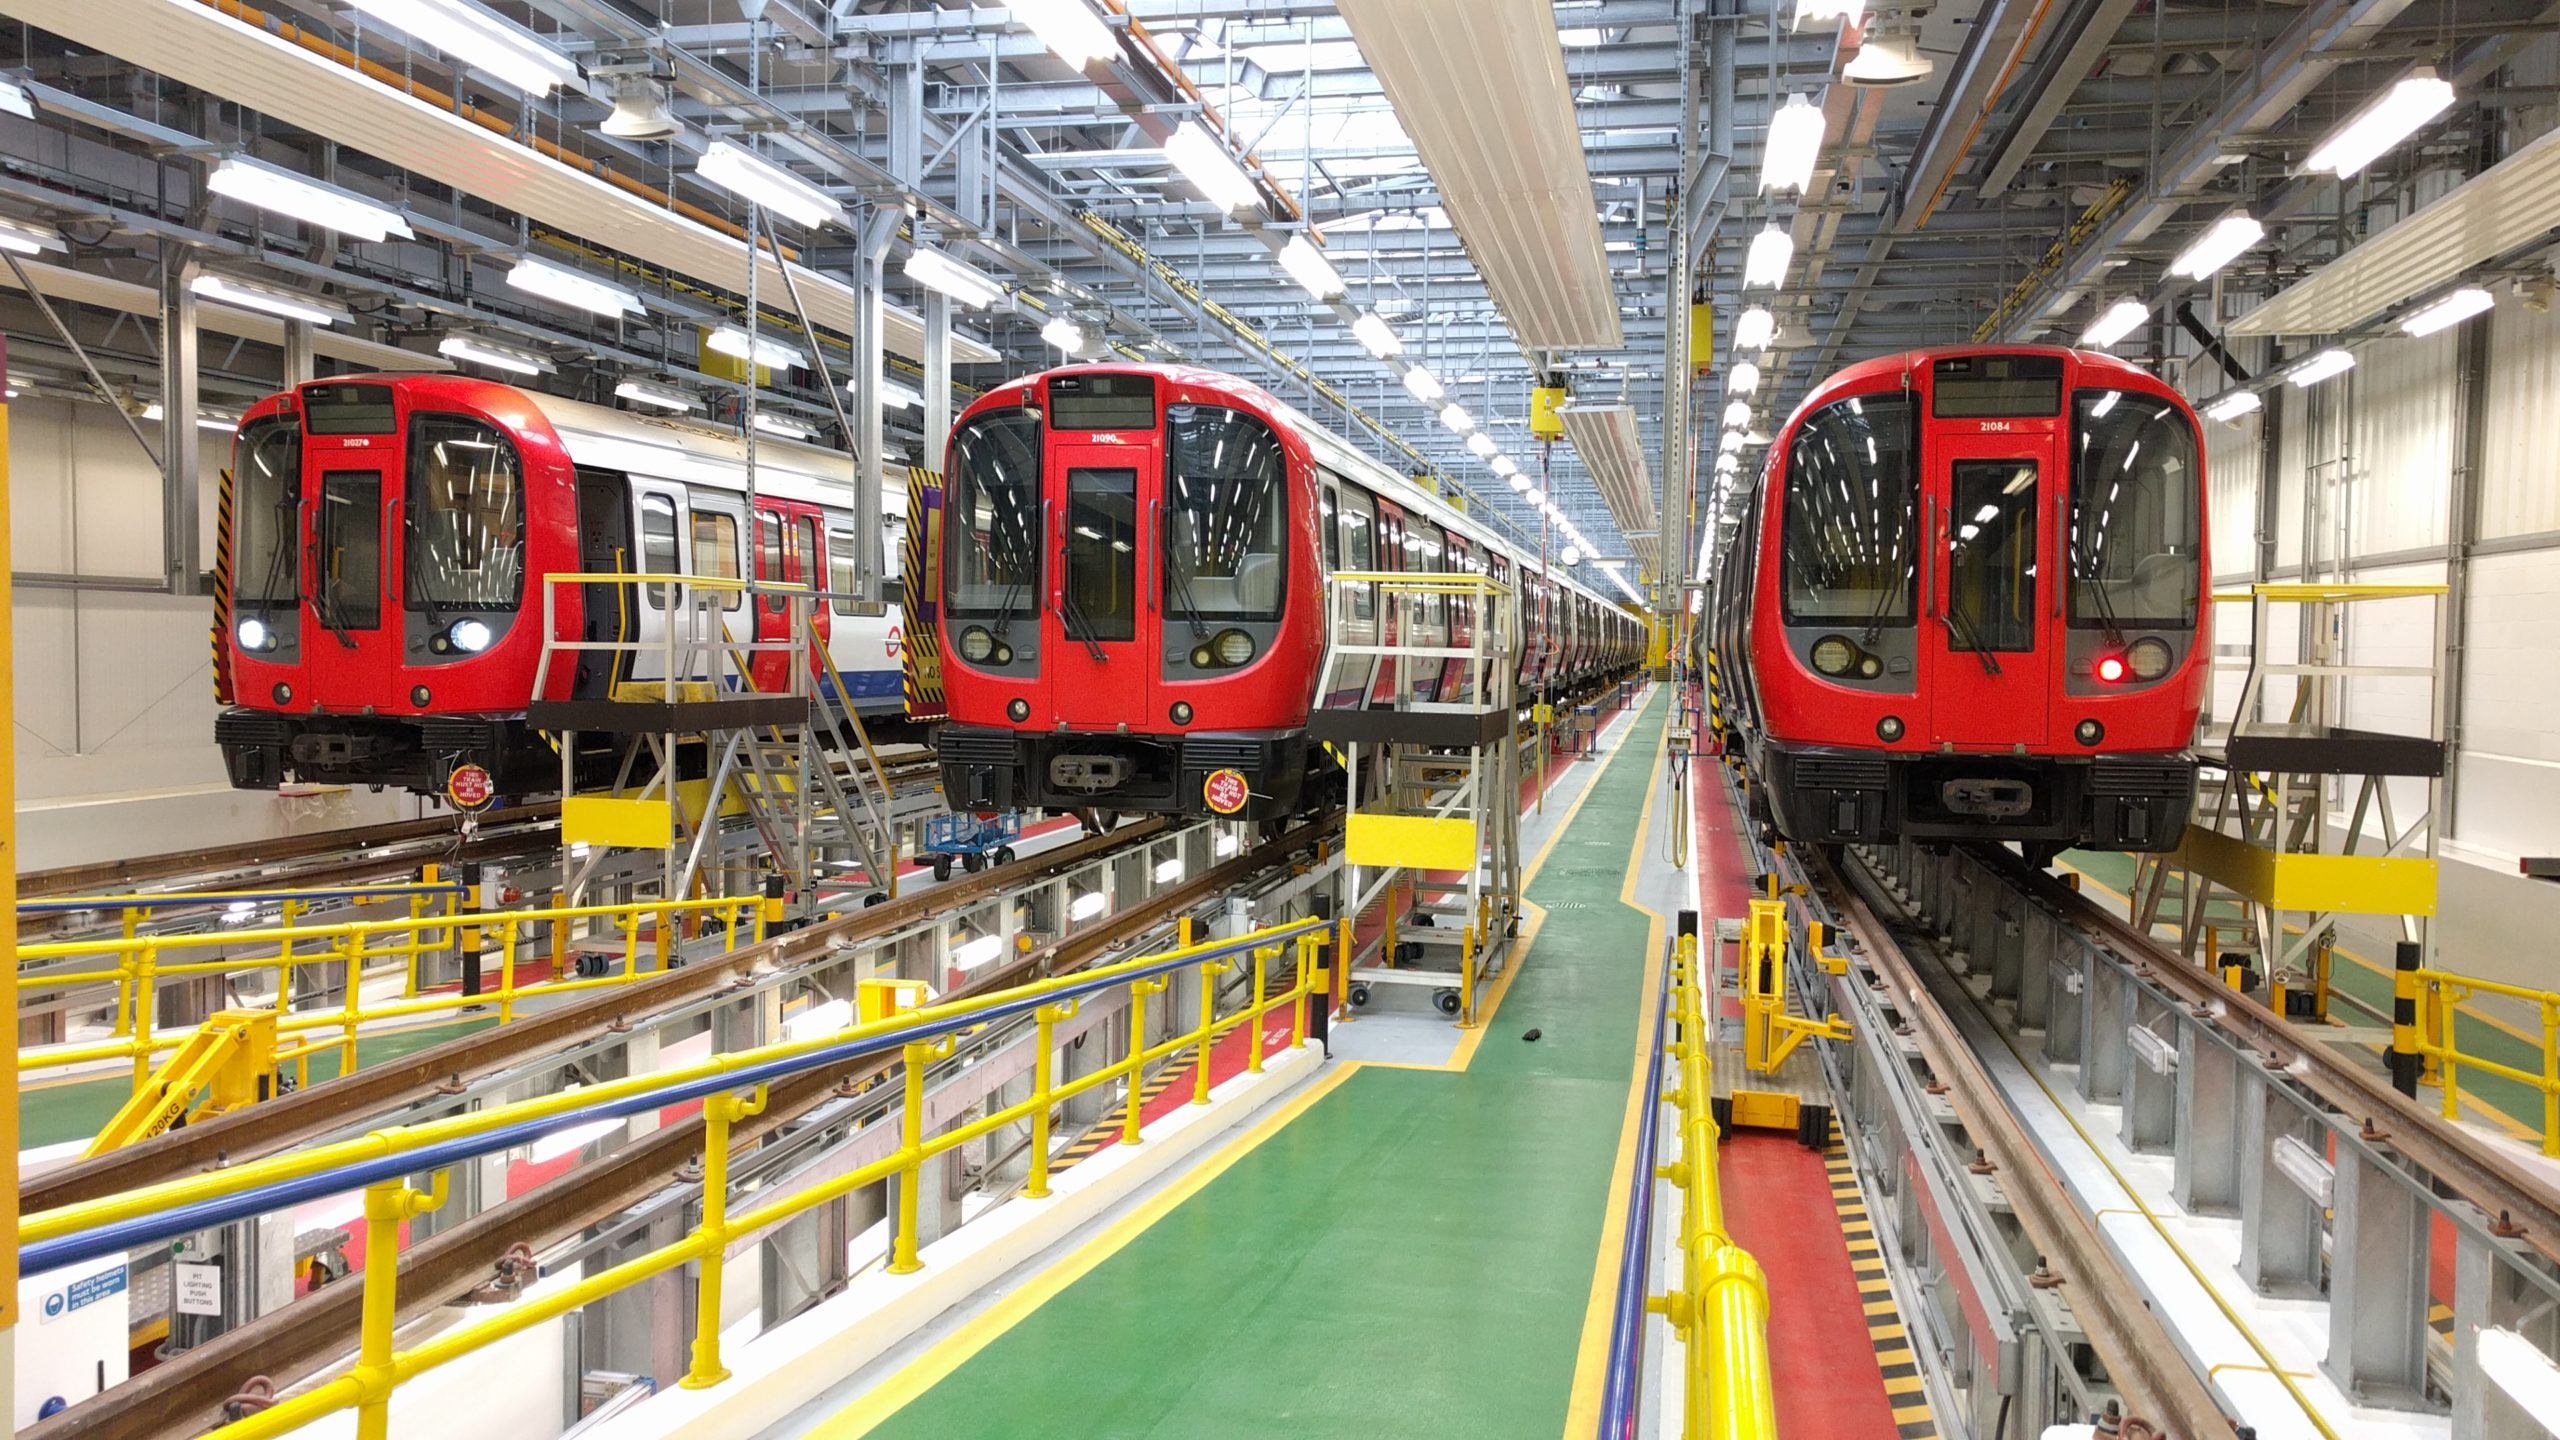 Image of three London Underground trains on elevated inspection tracks in a depot.